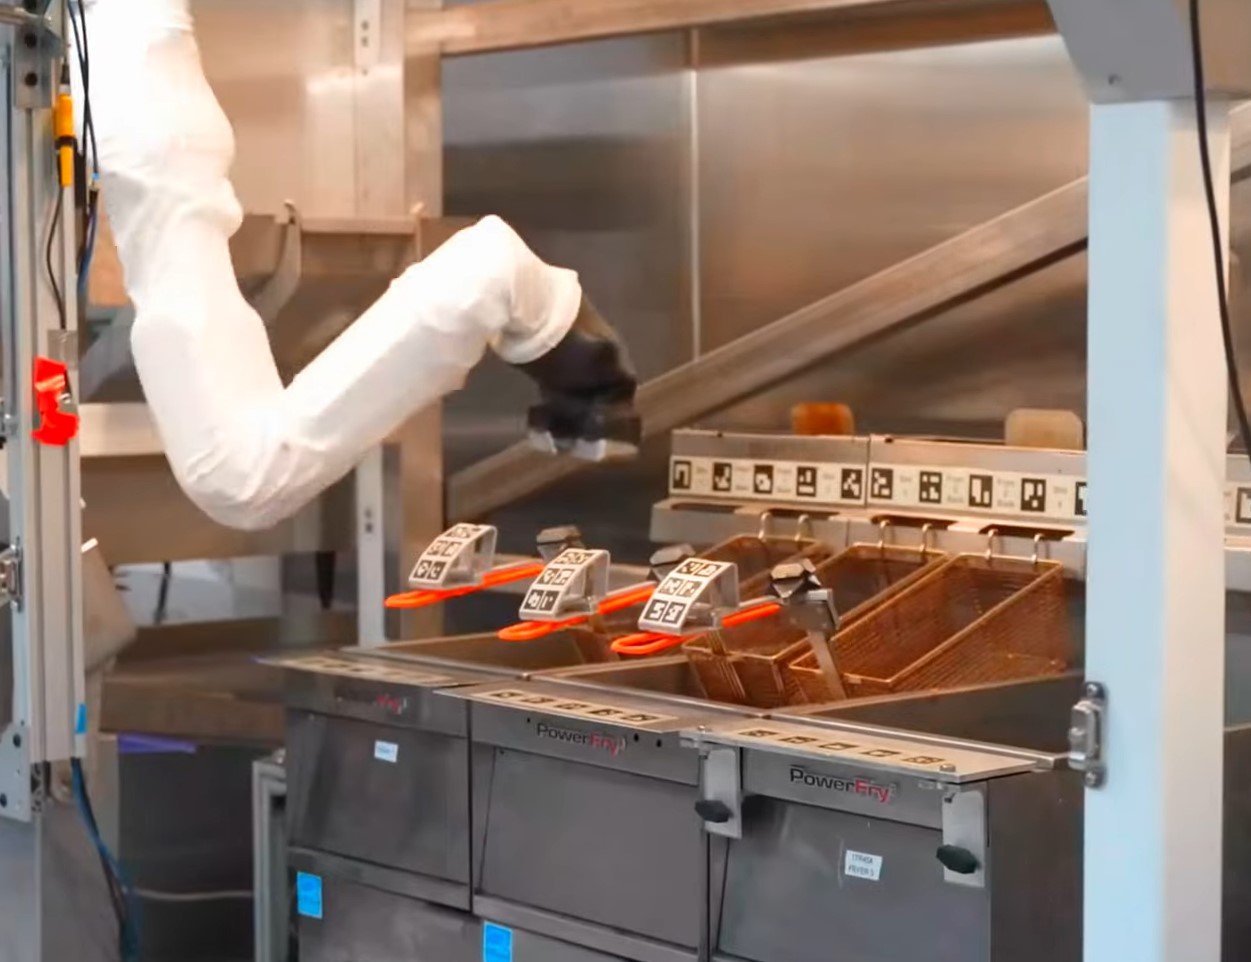 World's first robot-run restaurant set to launch in California, where AI would take orders and completely automate 2